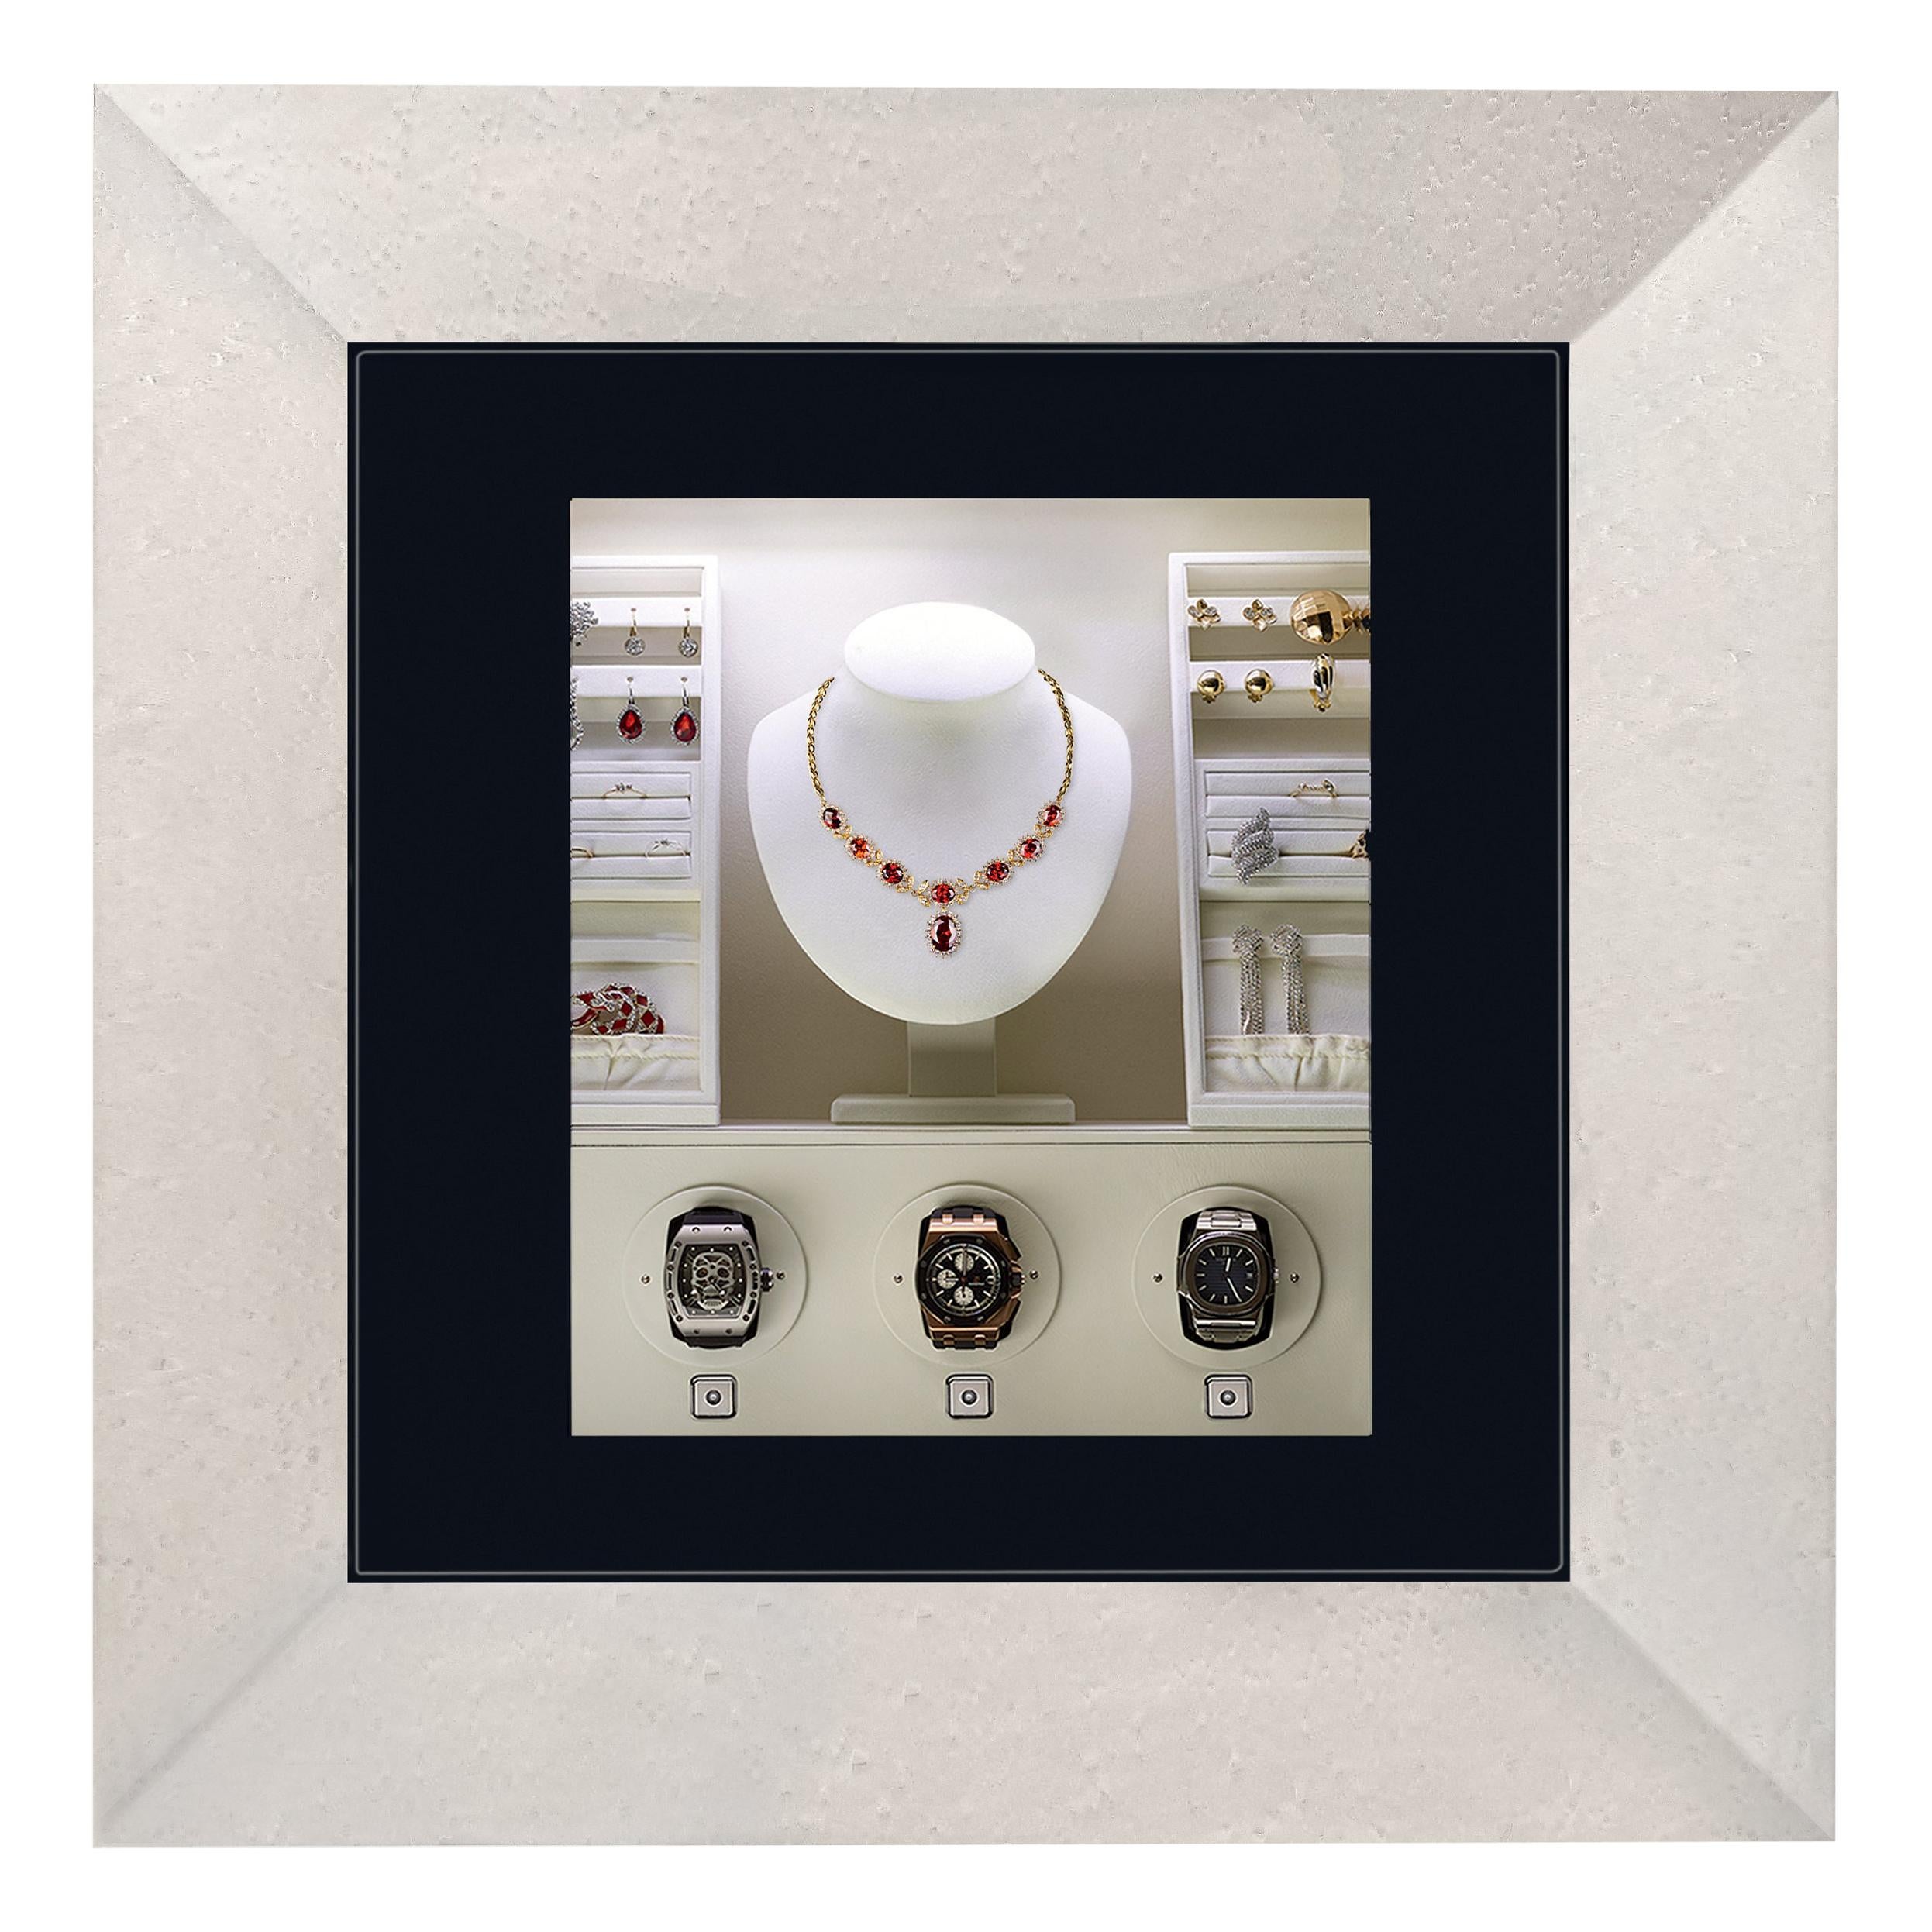 Agresti Mirror of Enchantment White Wall Safe with Watch Winders